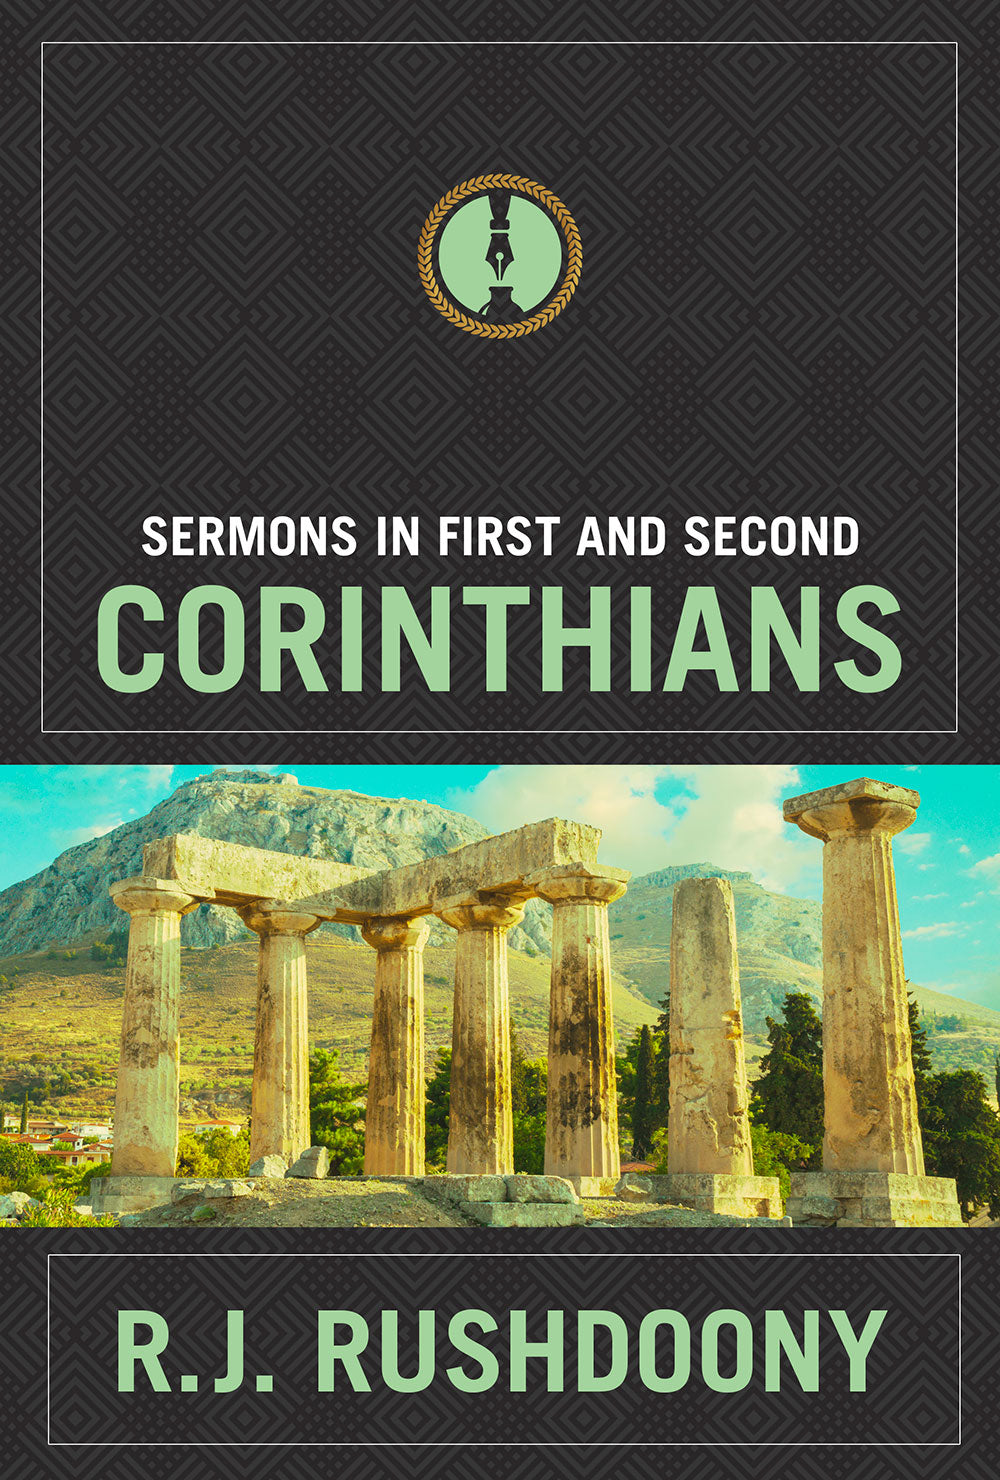 Sermons in I & II Corinthians Now Available